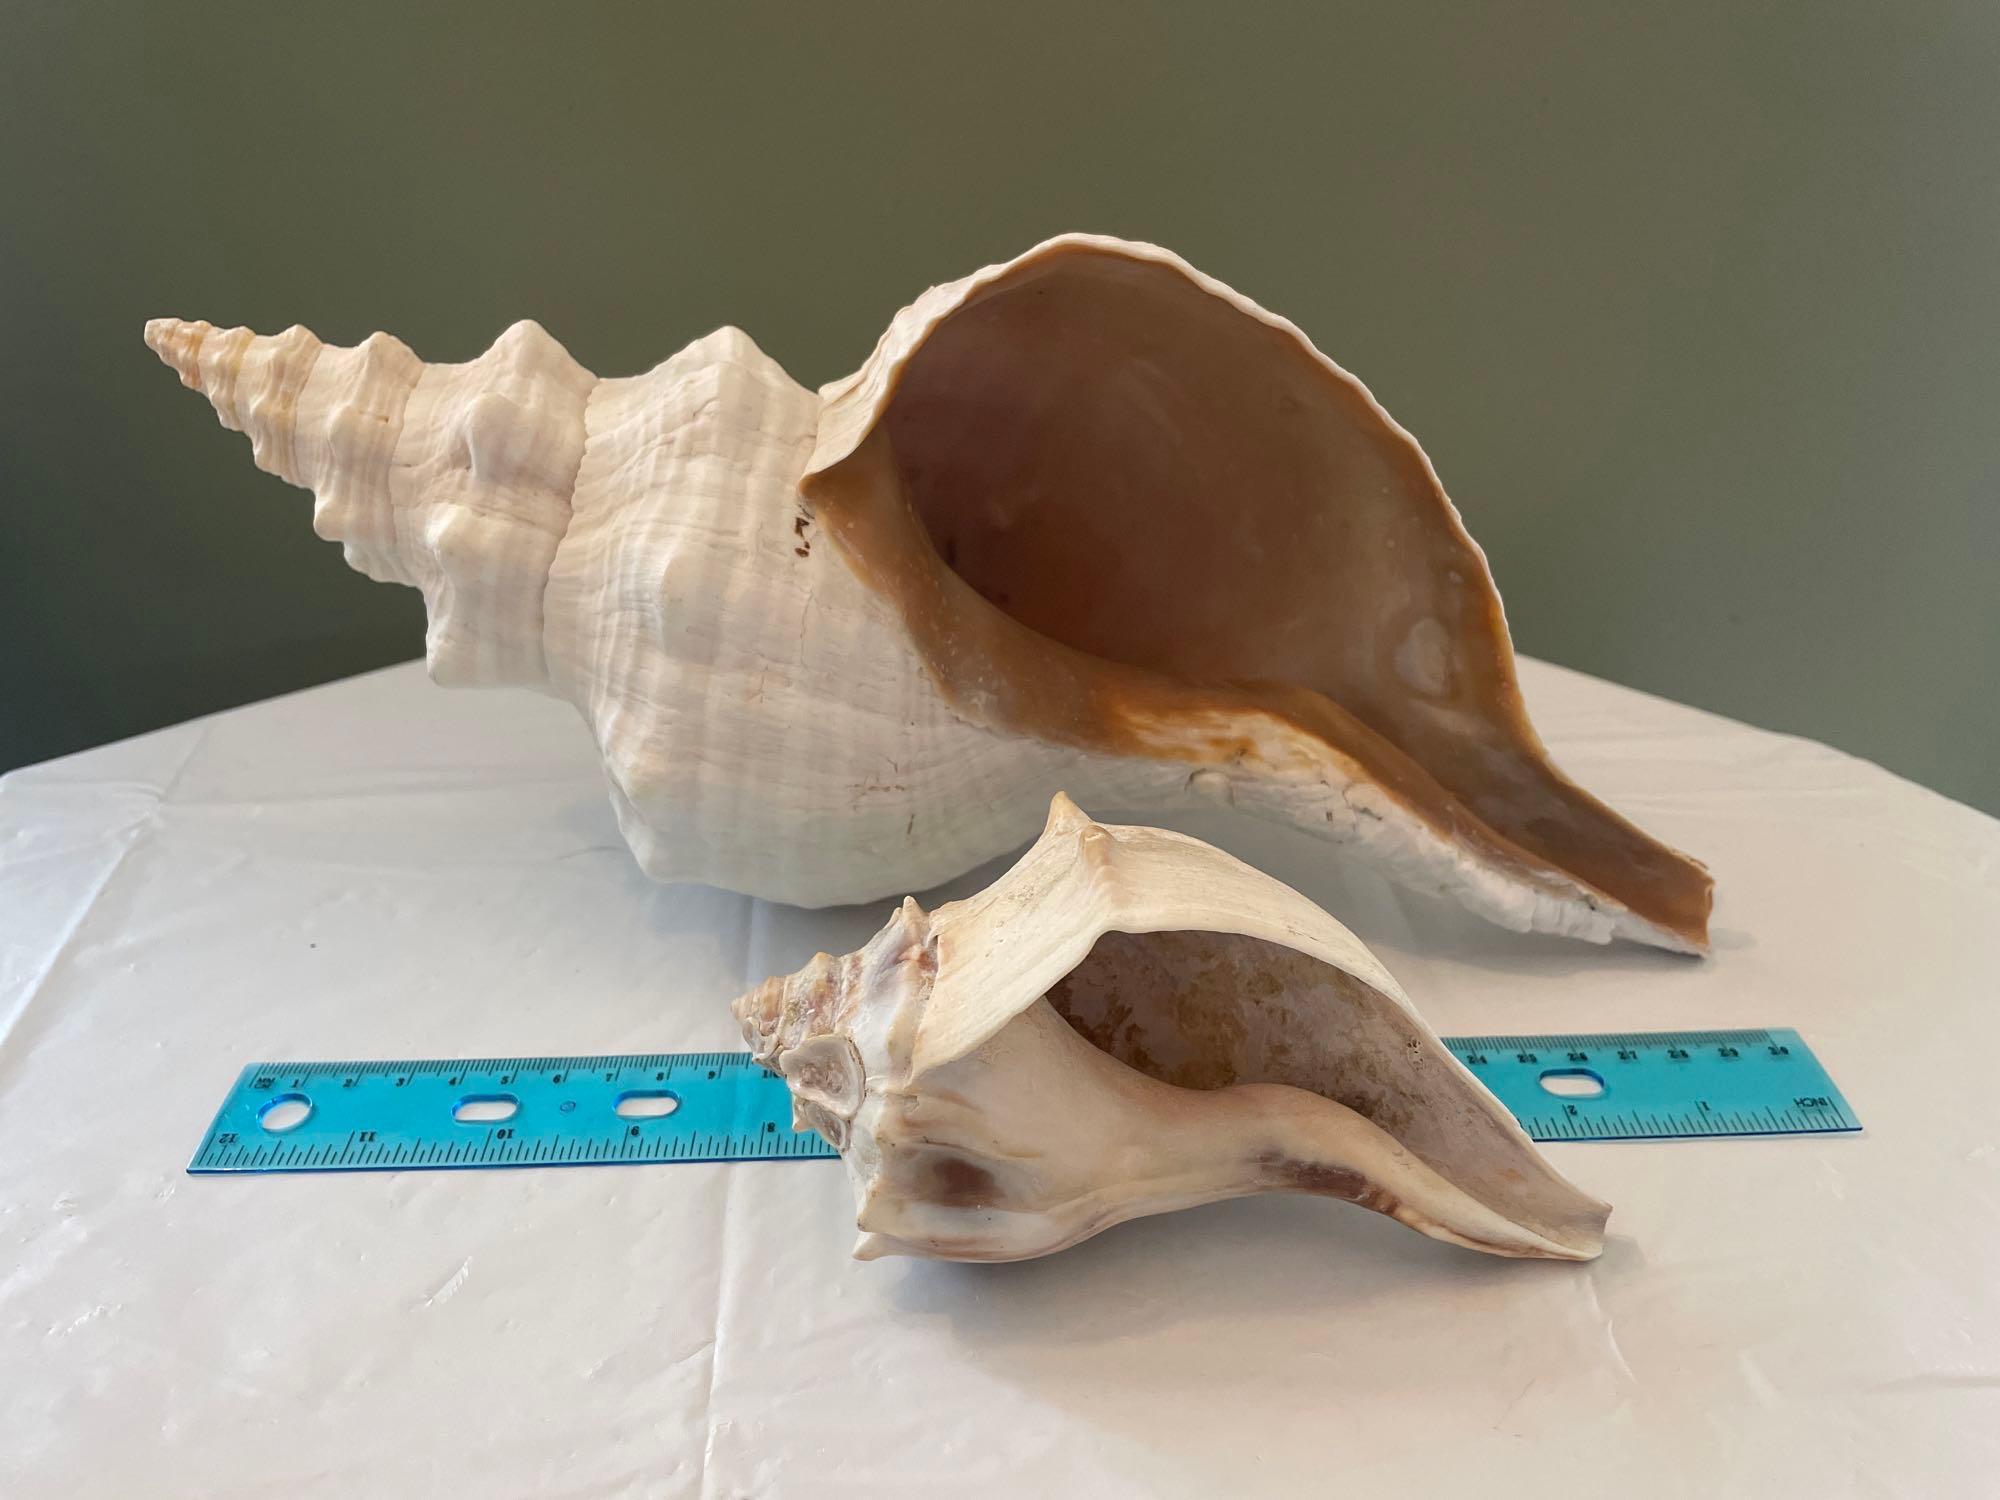 2 Conch shells & 1 Large Whole Clam shell